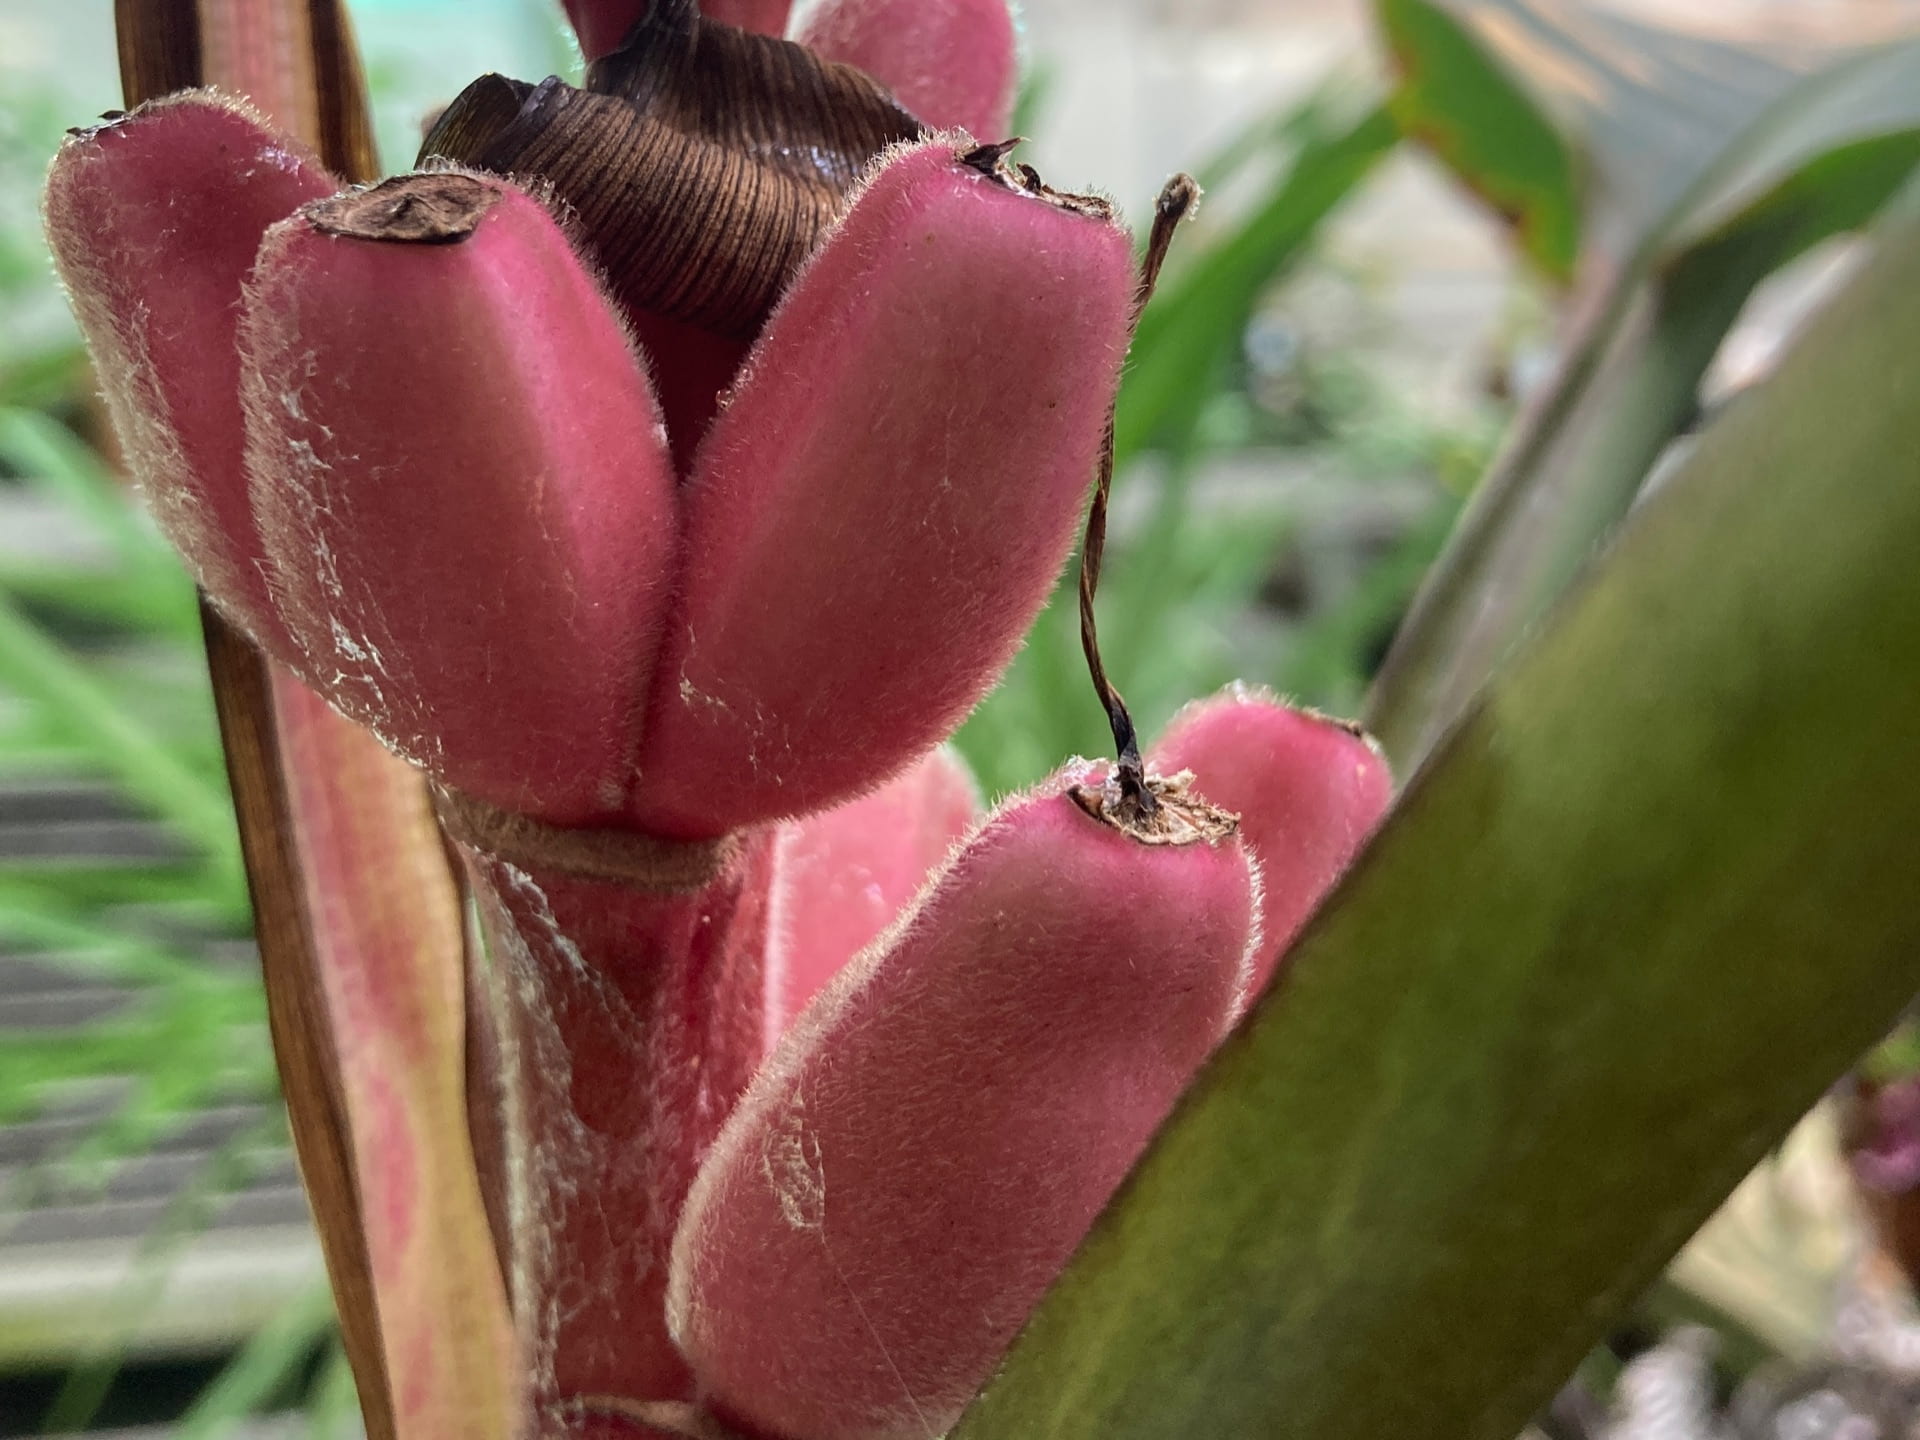 Several weeks later these small, fuzzy, pink bananas develop on Musa velutina.